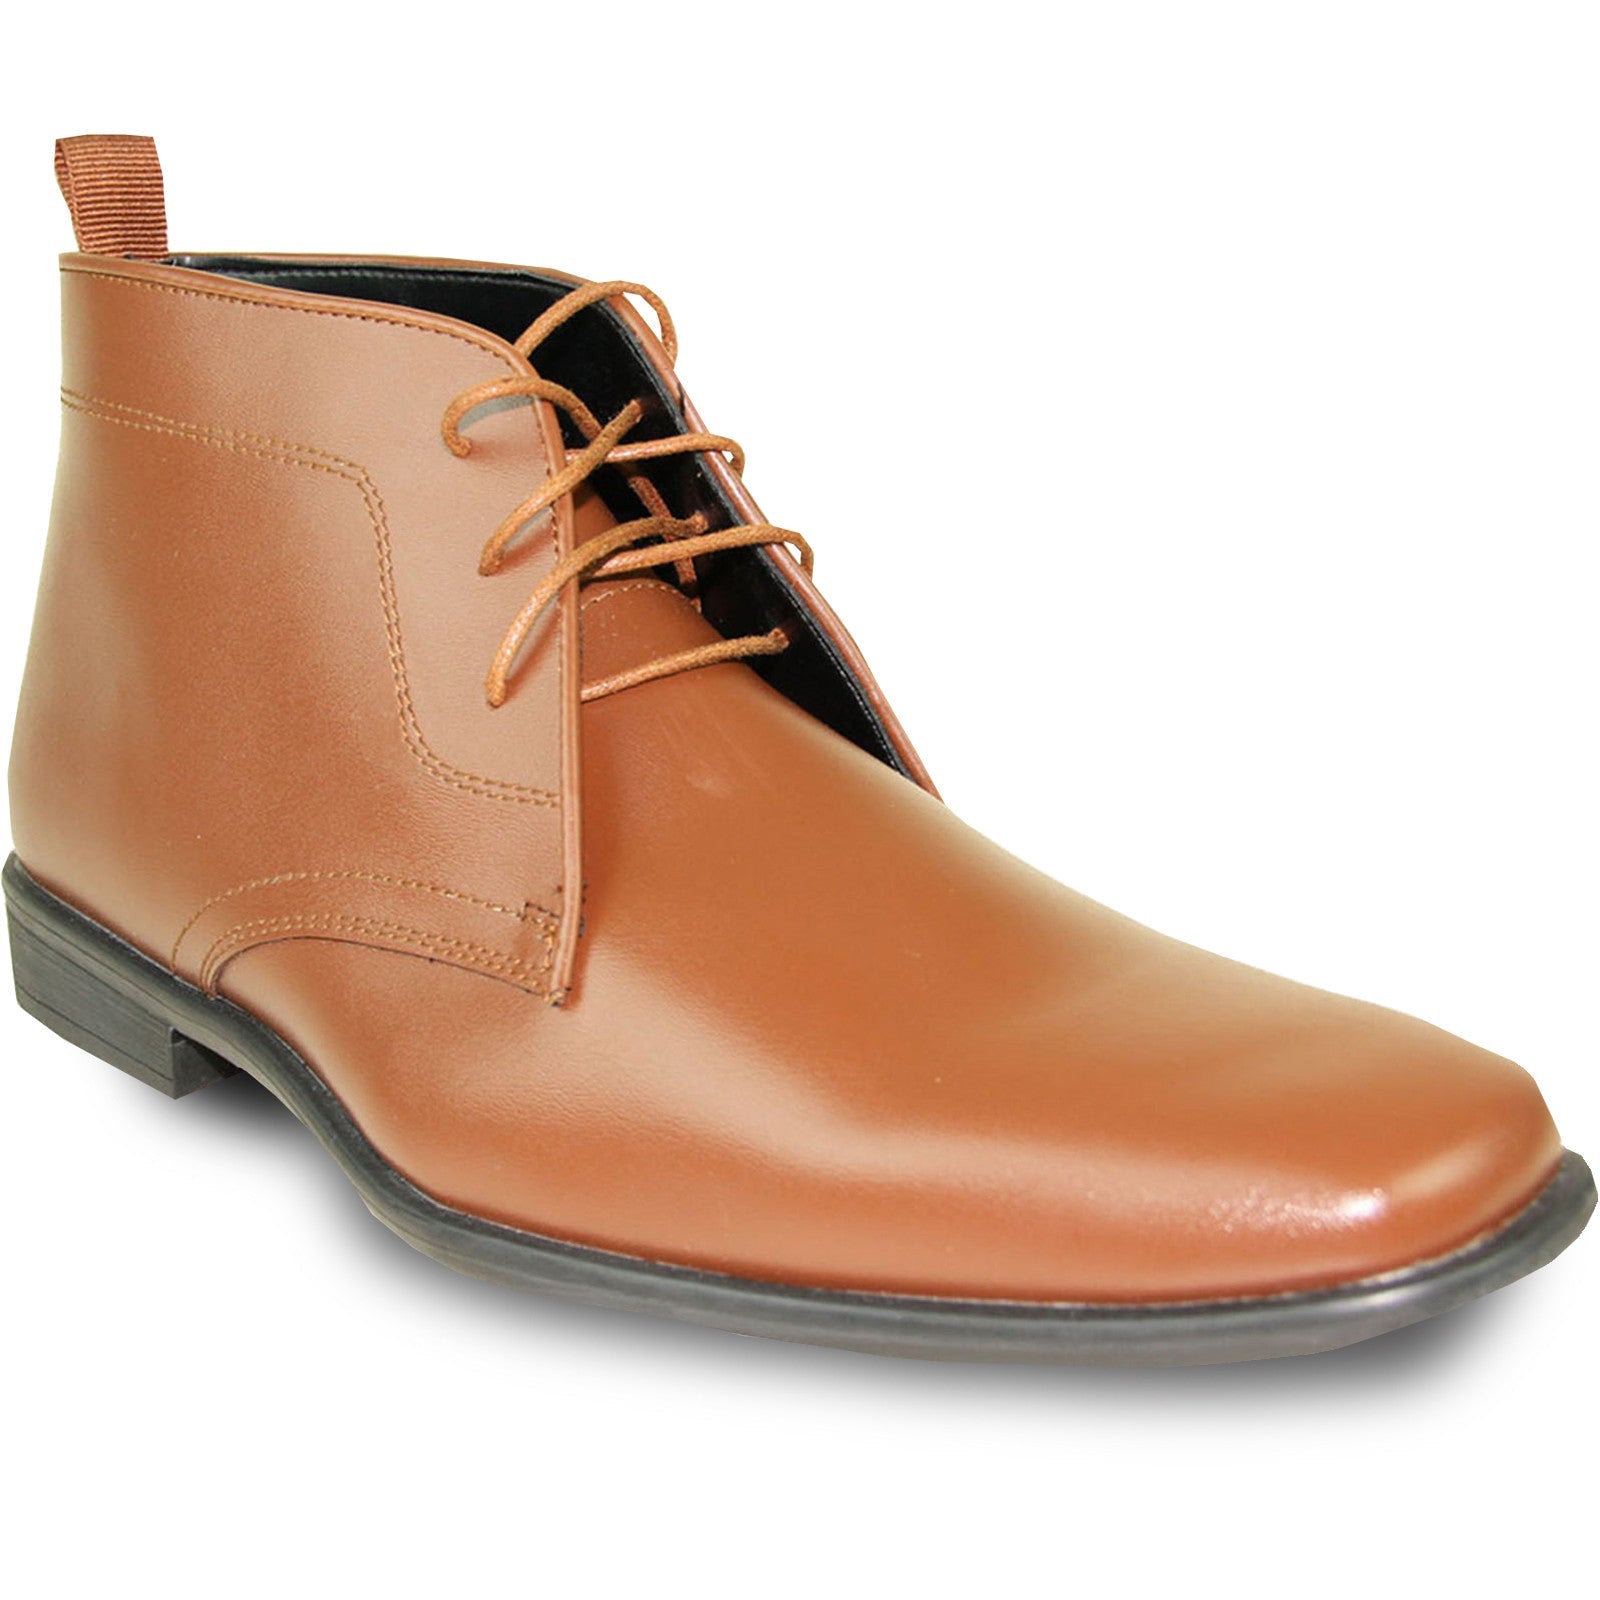 "Brown Men's Formal Ankle Boot for Prom & Wedding Events"